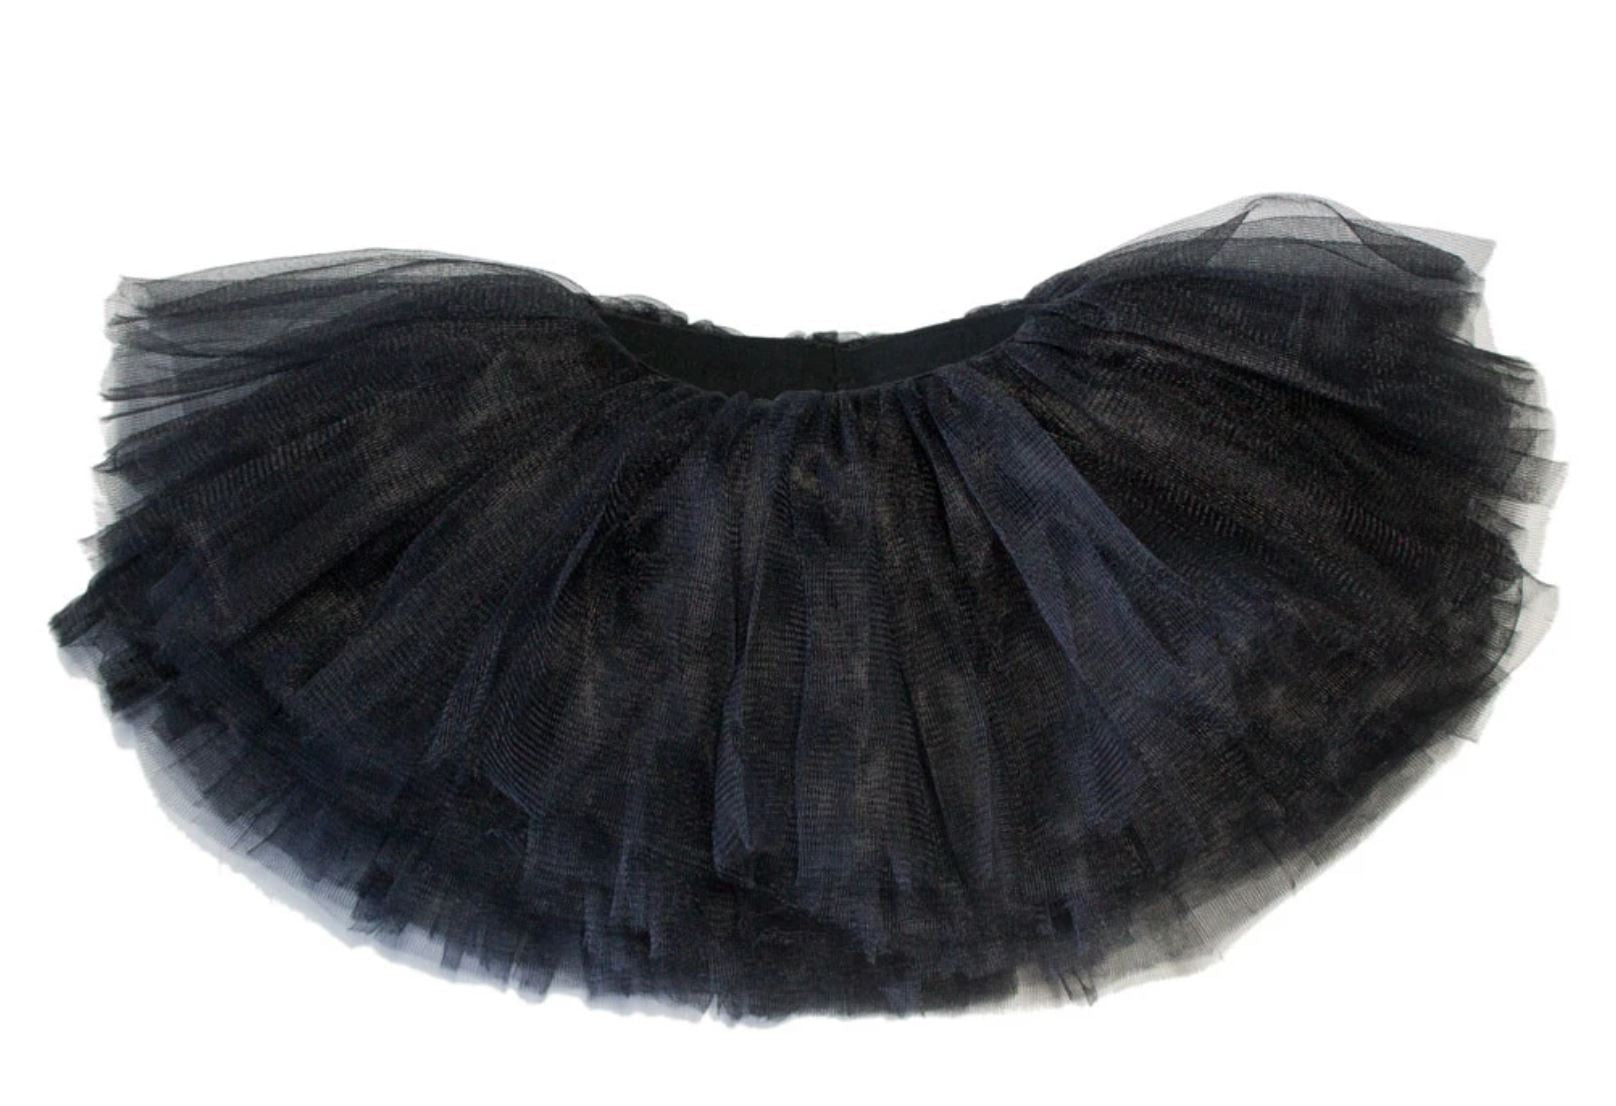 Baby Tutu  (10 Layers),  Ages: NB - 3 M